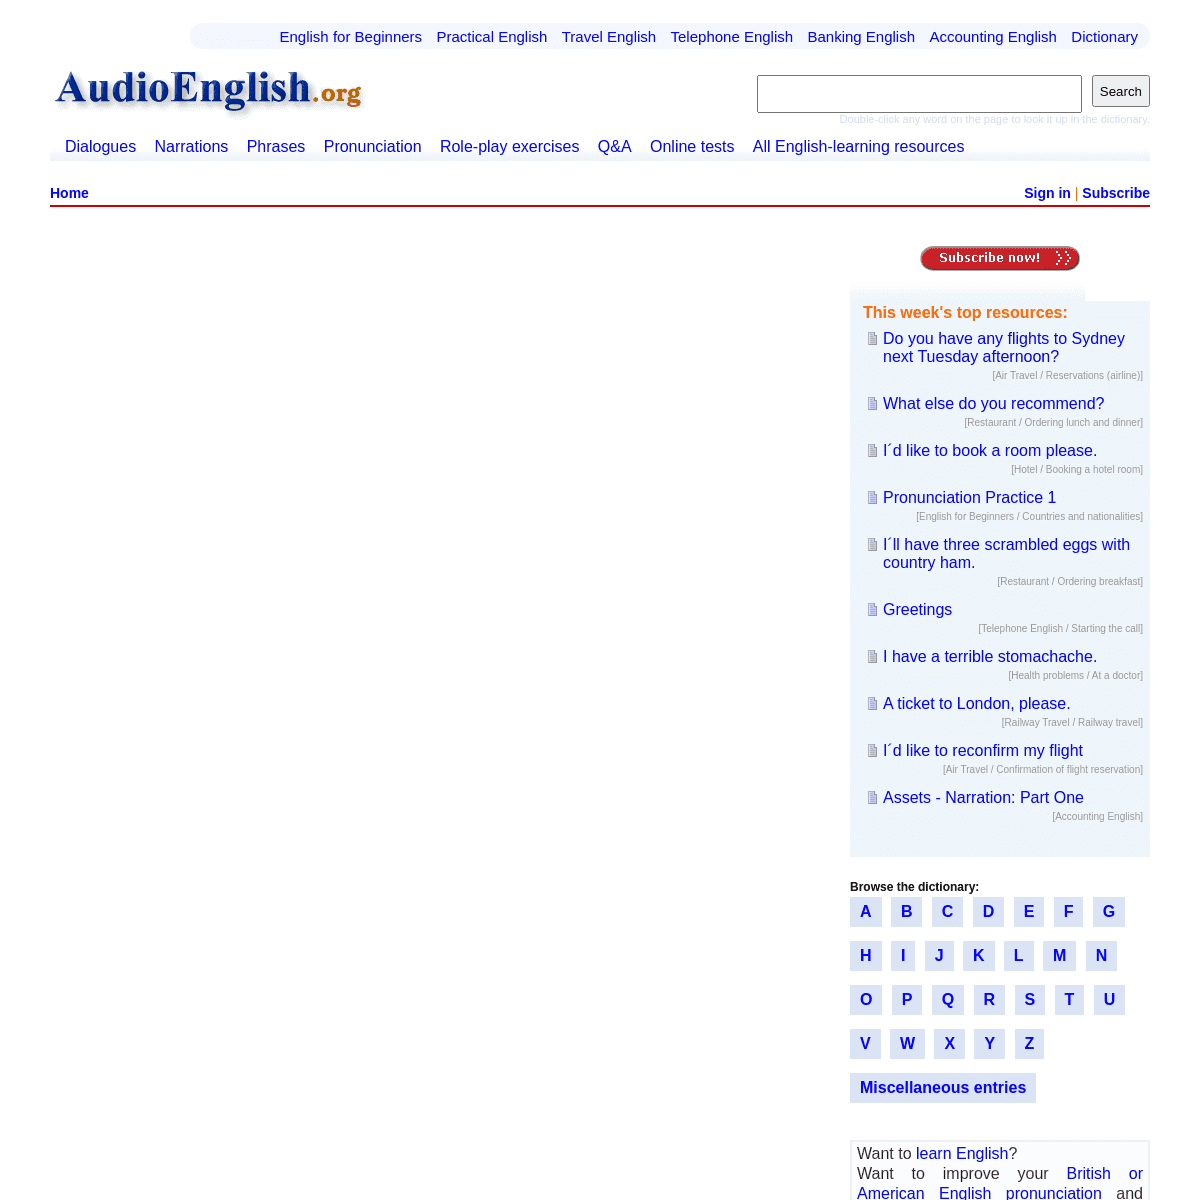 A complete backup of https://audioenglish.org